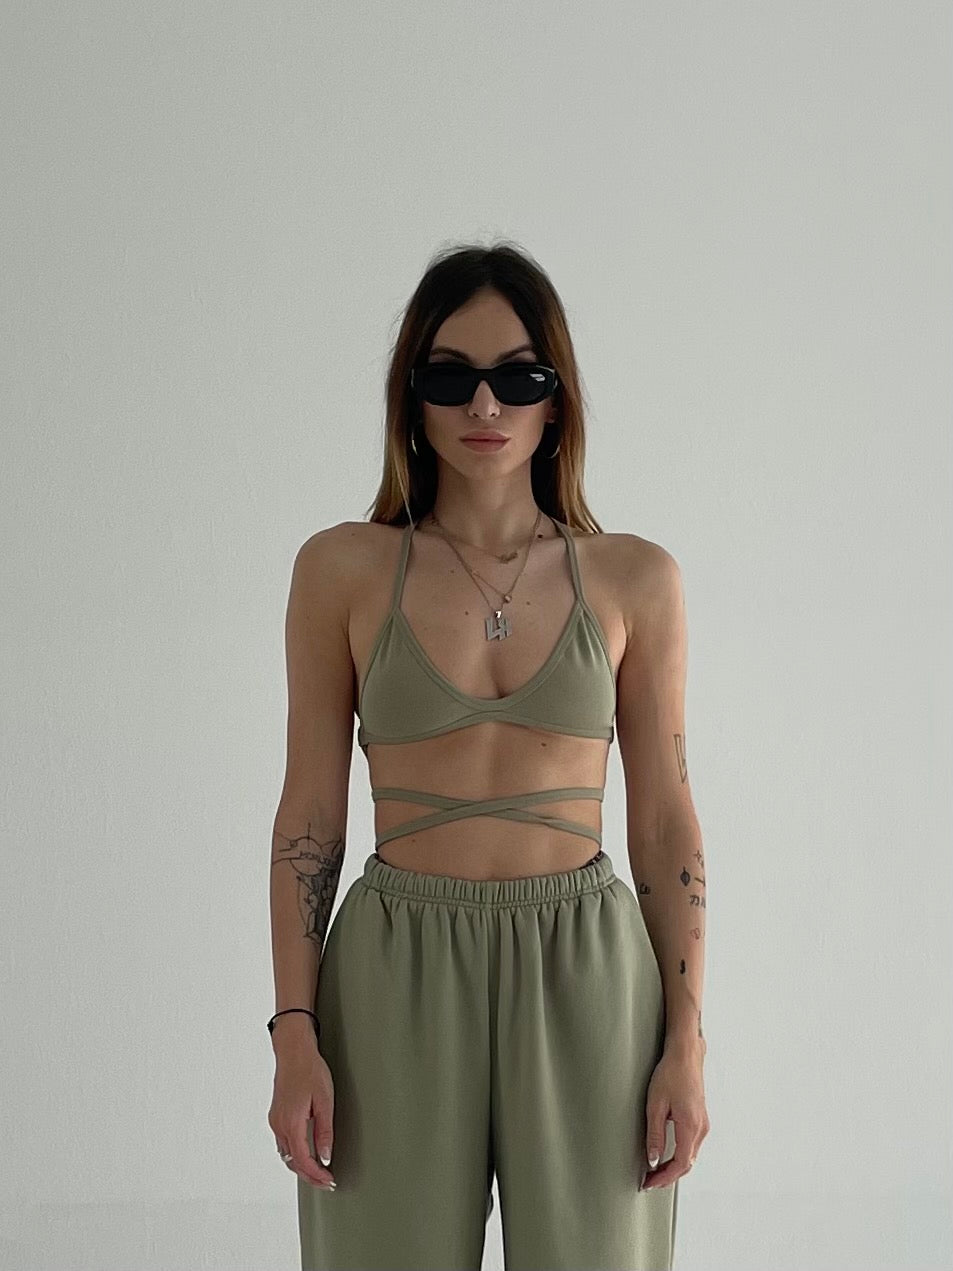 “GREENCASH” collection string top